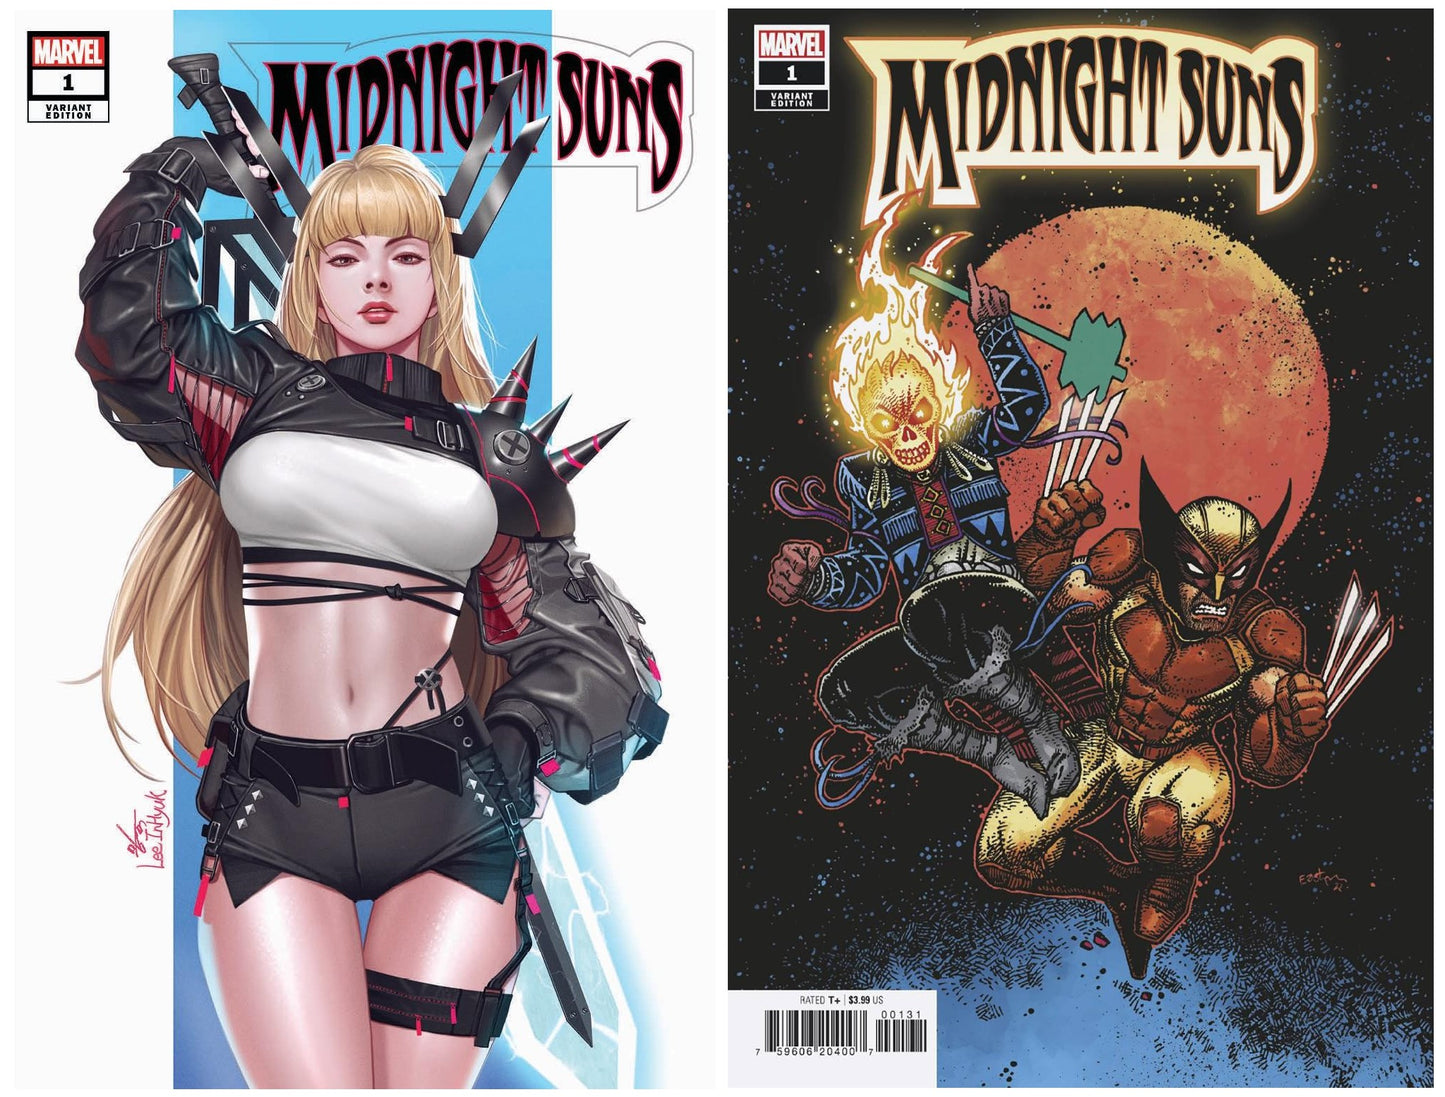 MIDNIGHT SUNS #1 INHYUK LEE VARIANT LIMITED TO 800 COPIES WITH NUMBERED COA & 1:25 KEVIN EASTMAN VARIANT